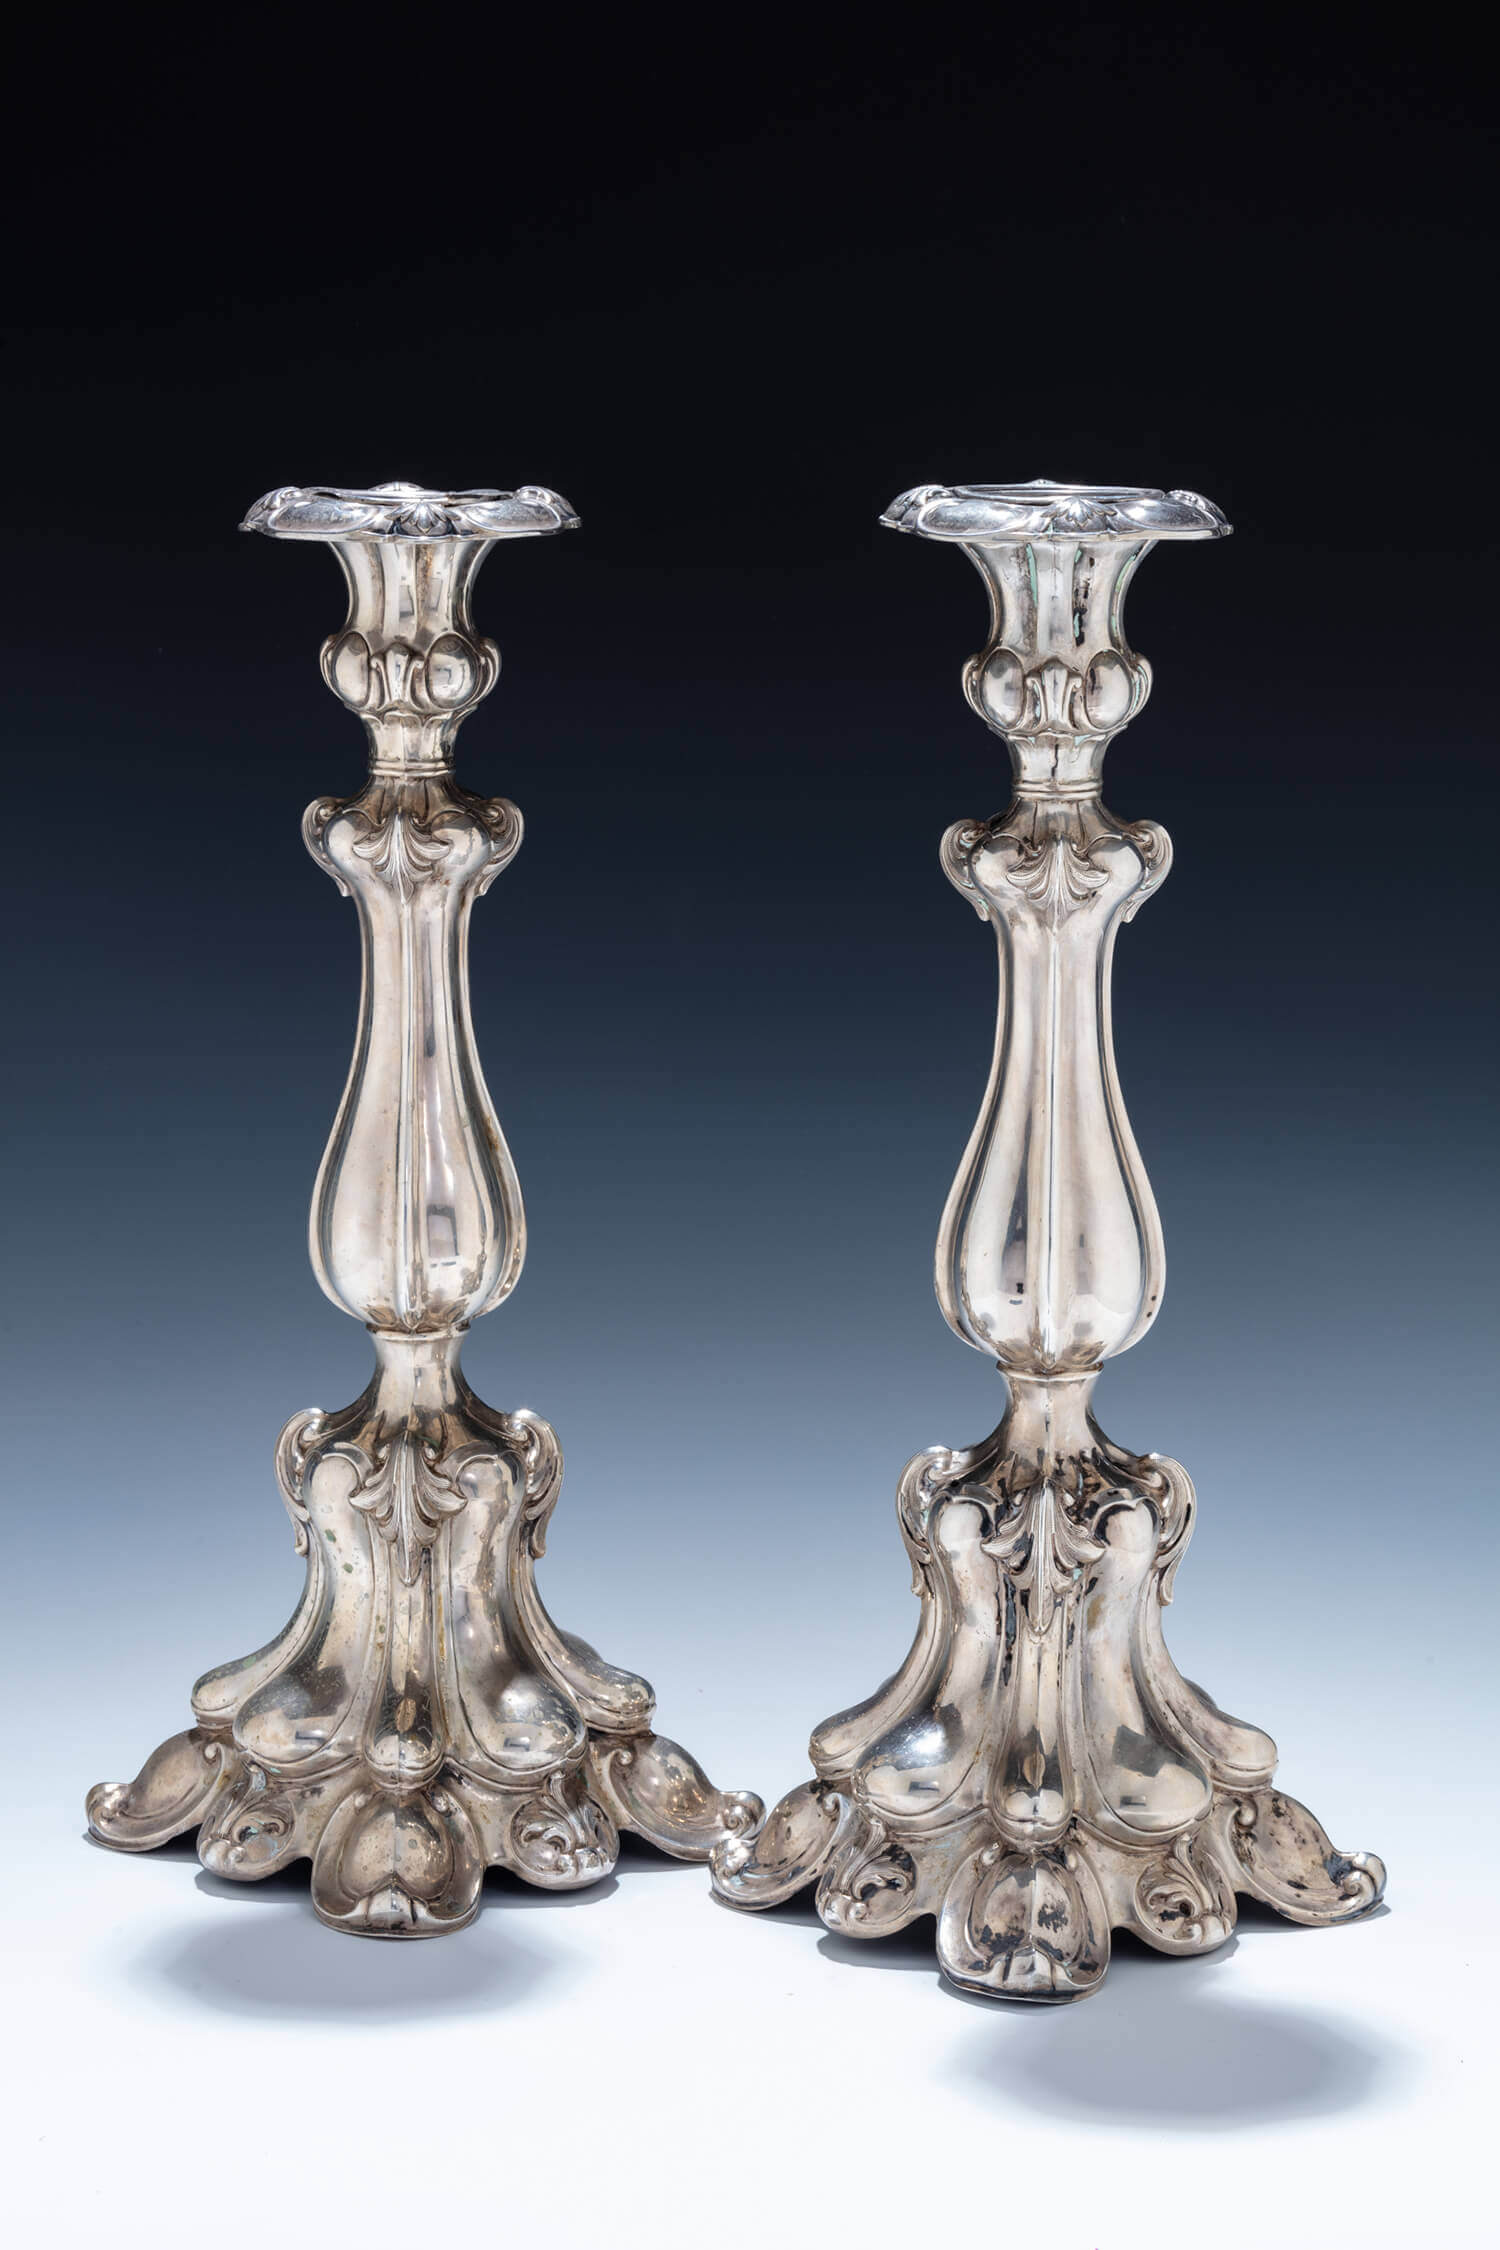 020. A PAIR OF SILVER CANDLESTICKS